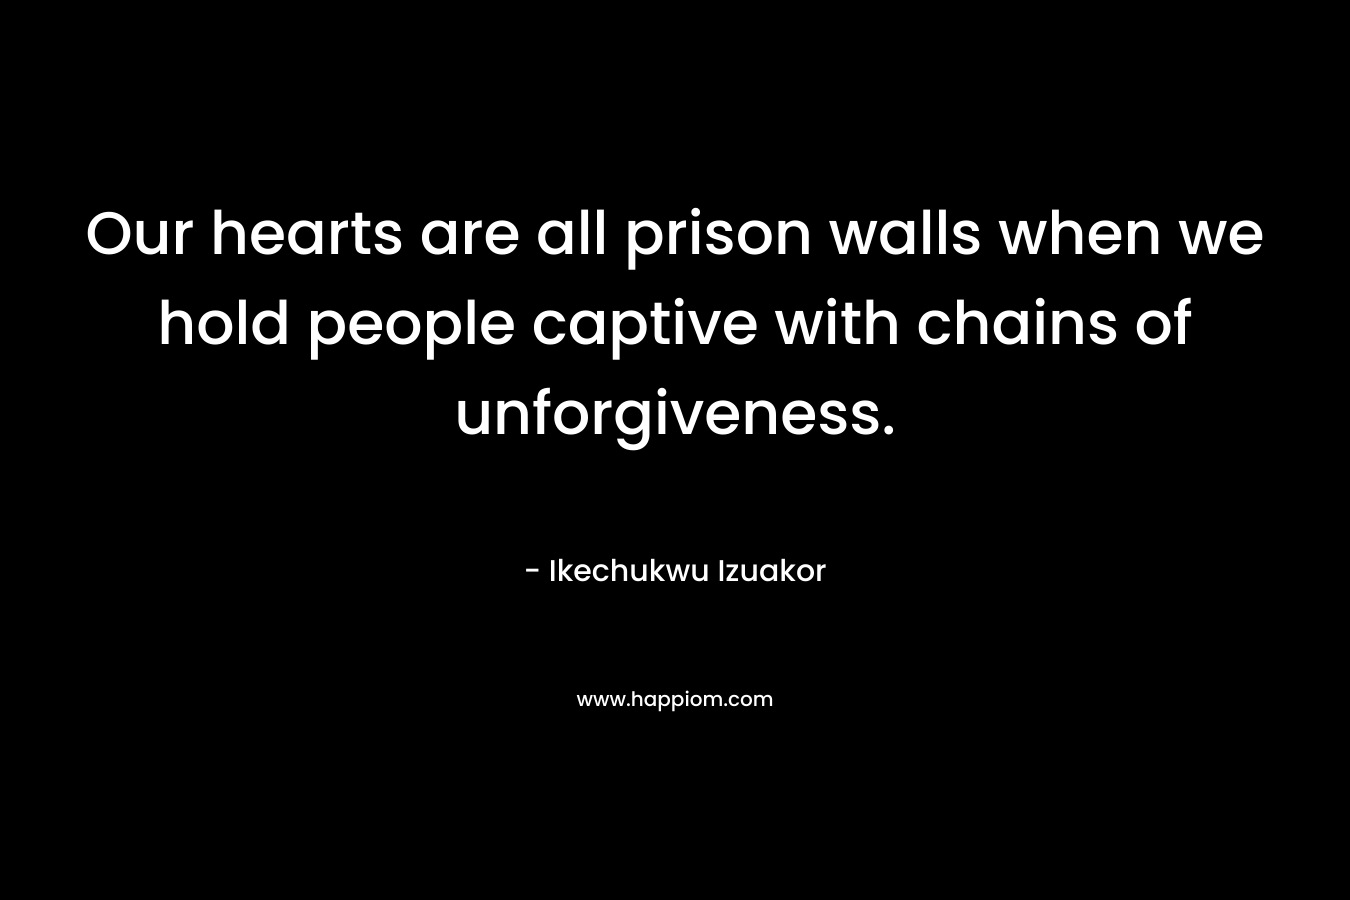 Our hearts are all prison walls when we hold people captive with chains of unforgiveness.